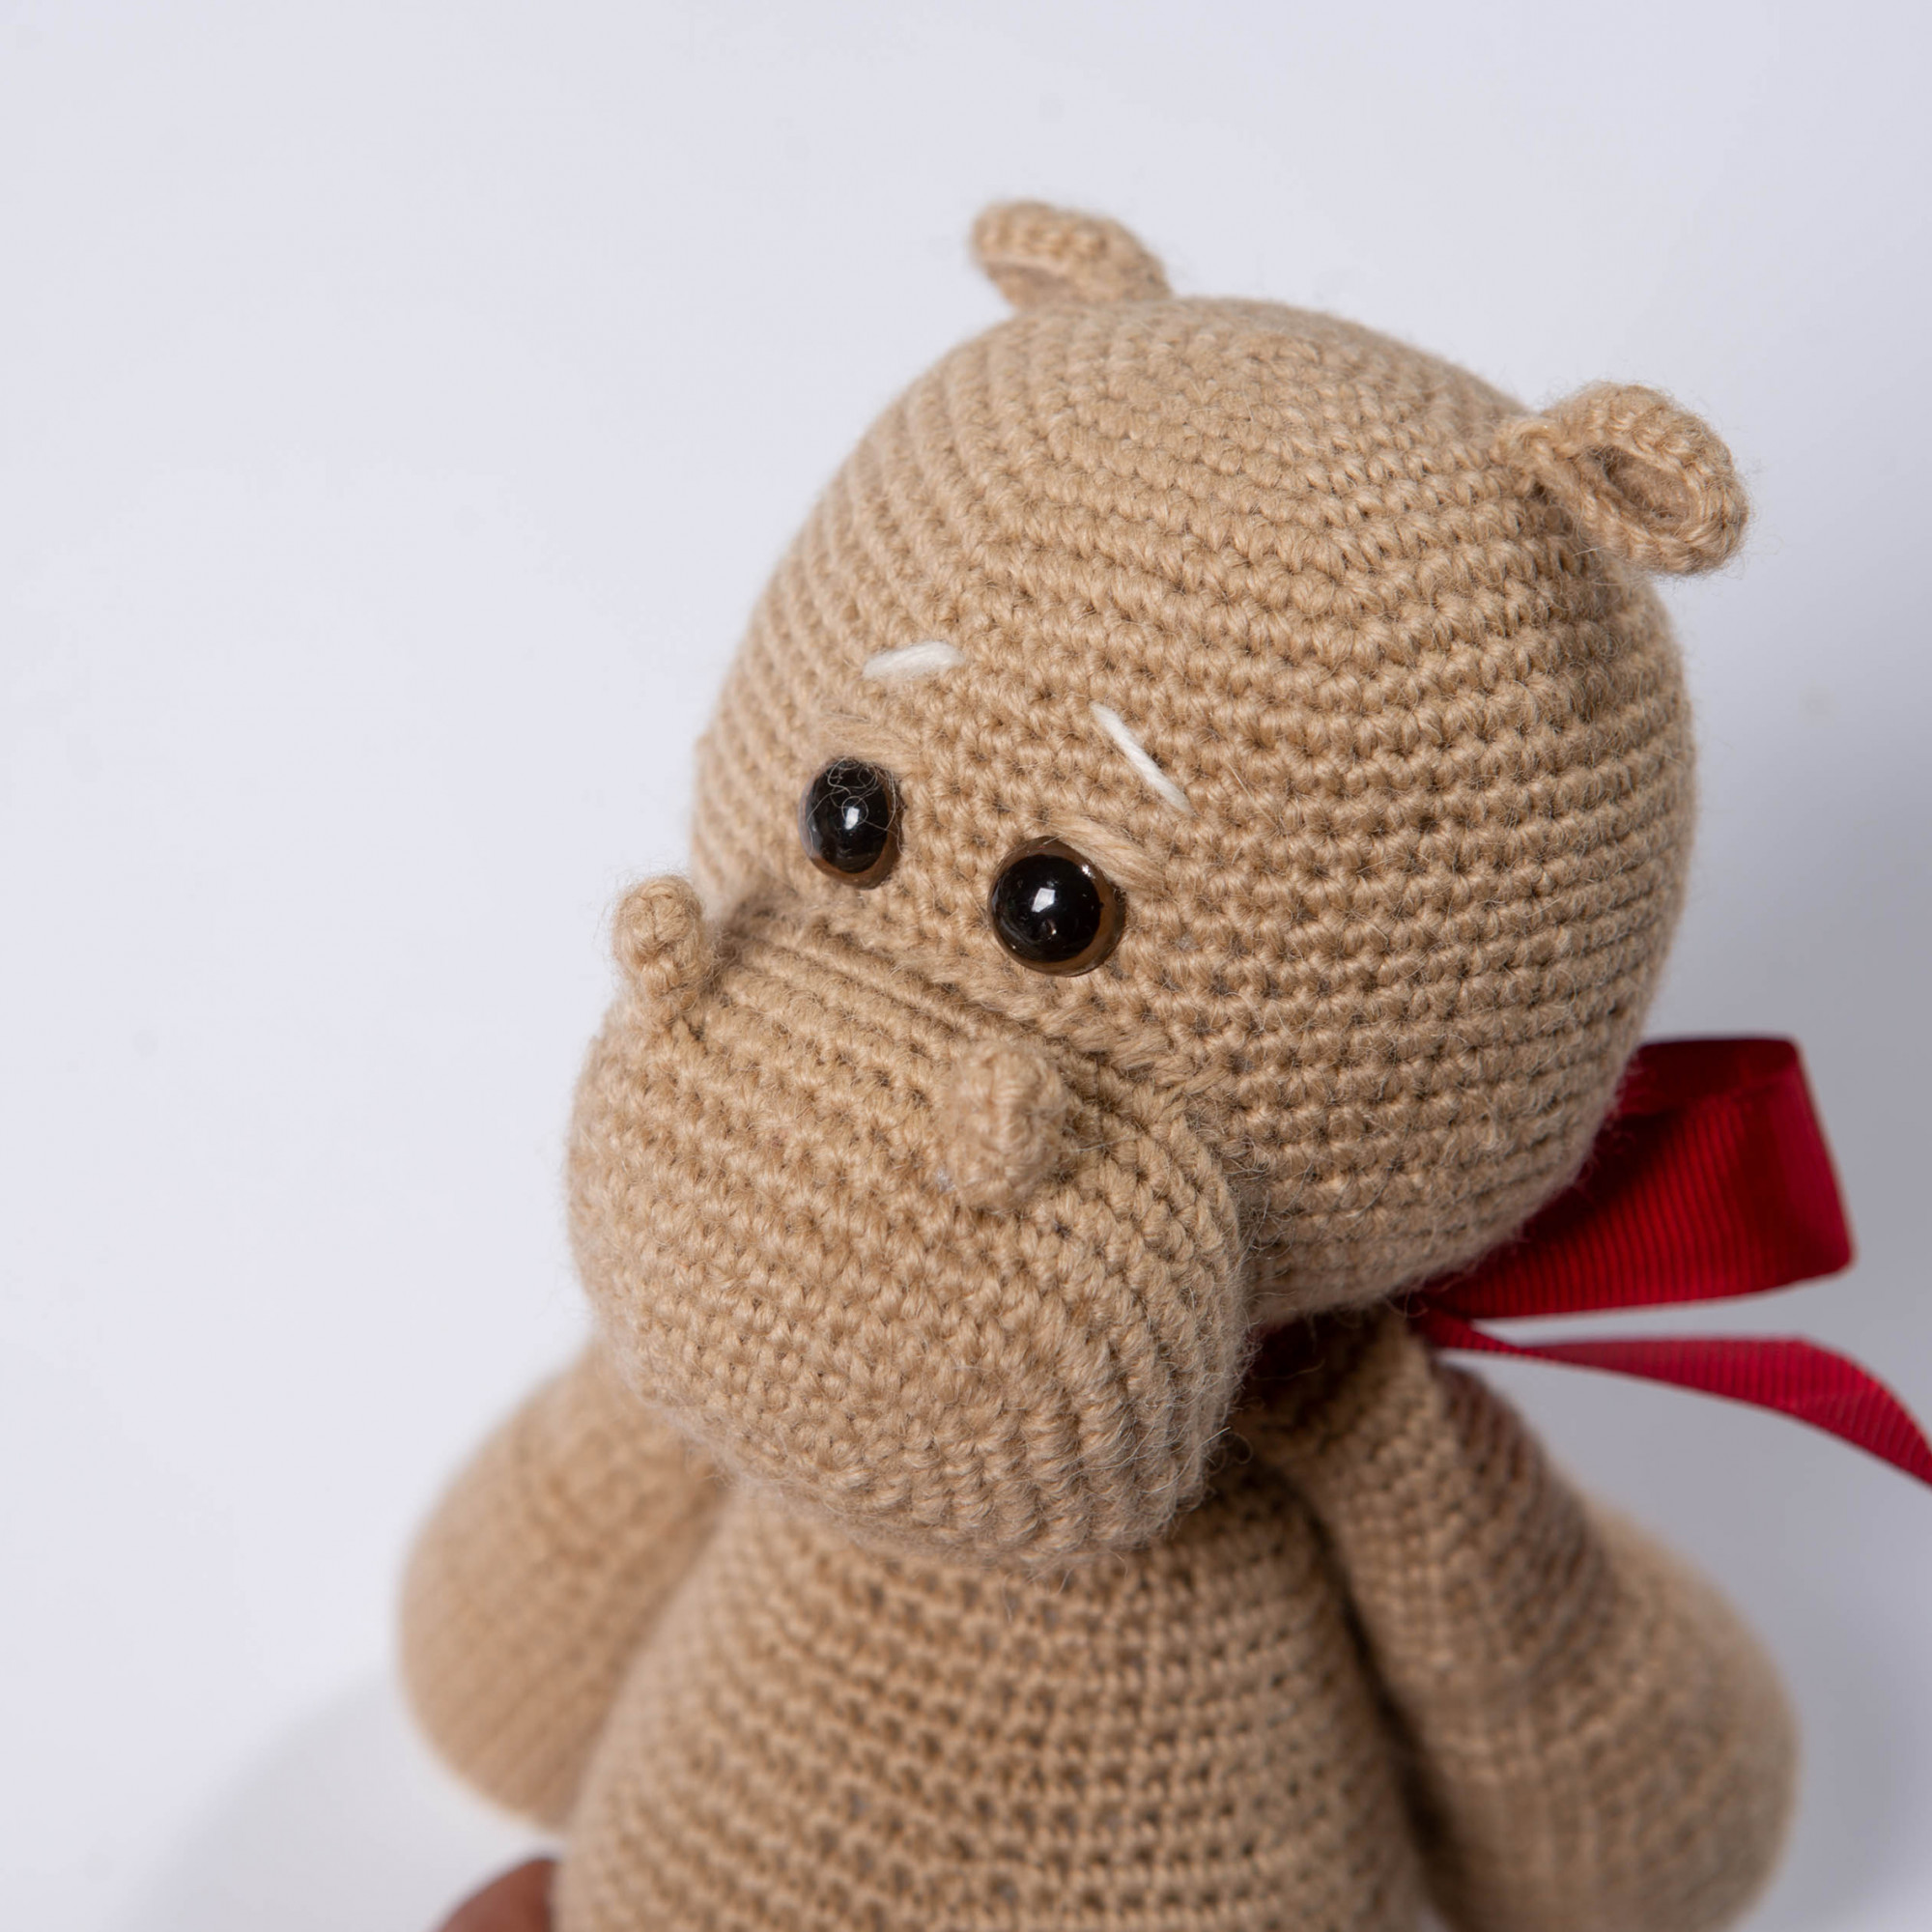 Toy Hippo The best gift for the kid Crocheted Hippo